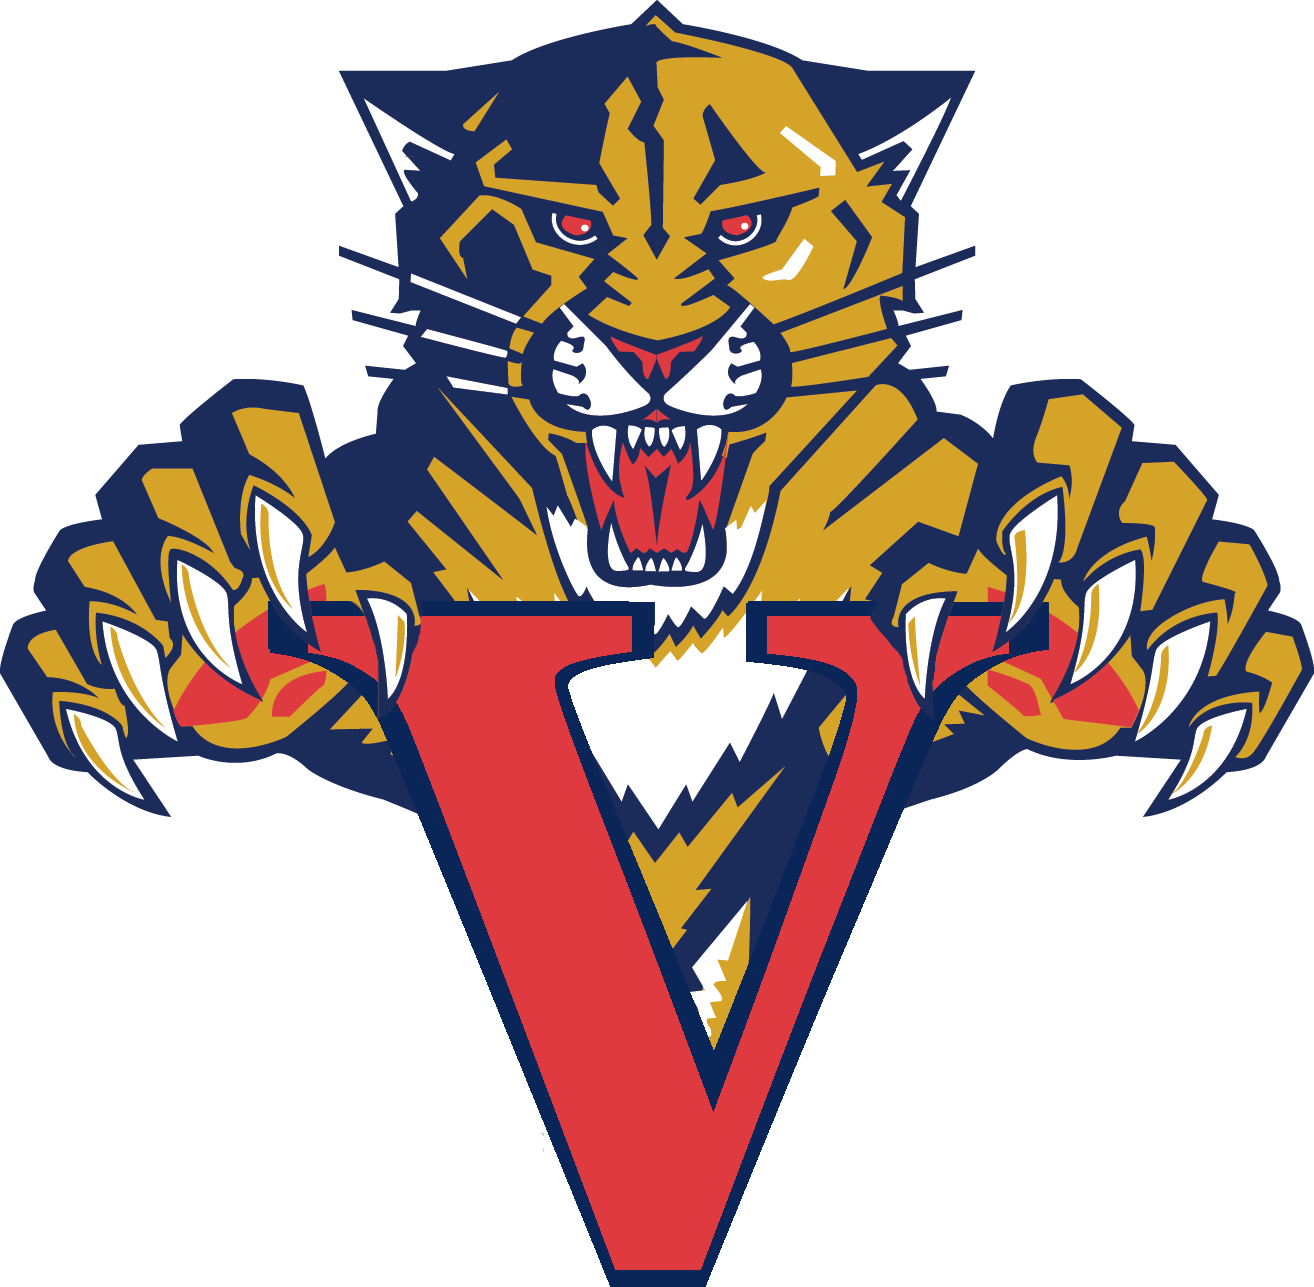 2015/16 Athlete's Package - Florida Panthers (1314x1287)